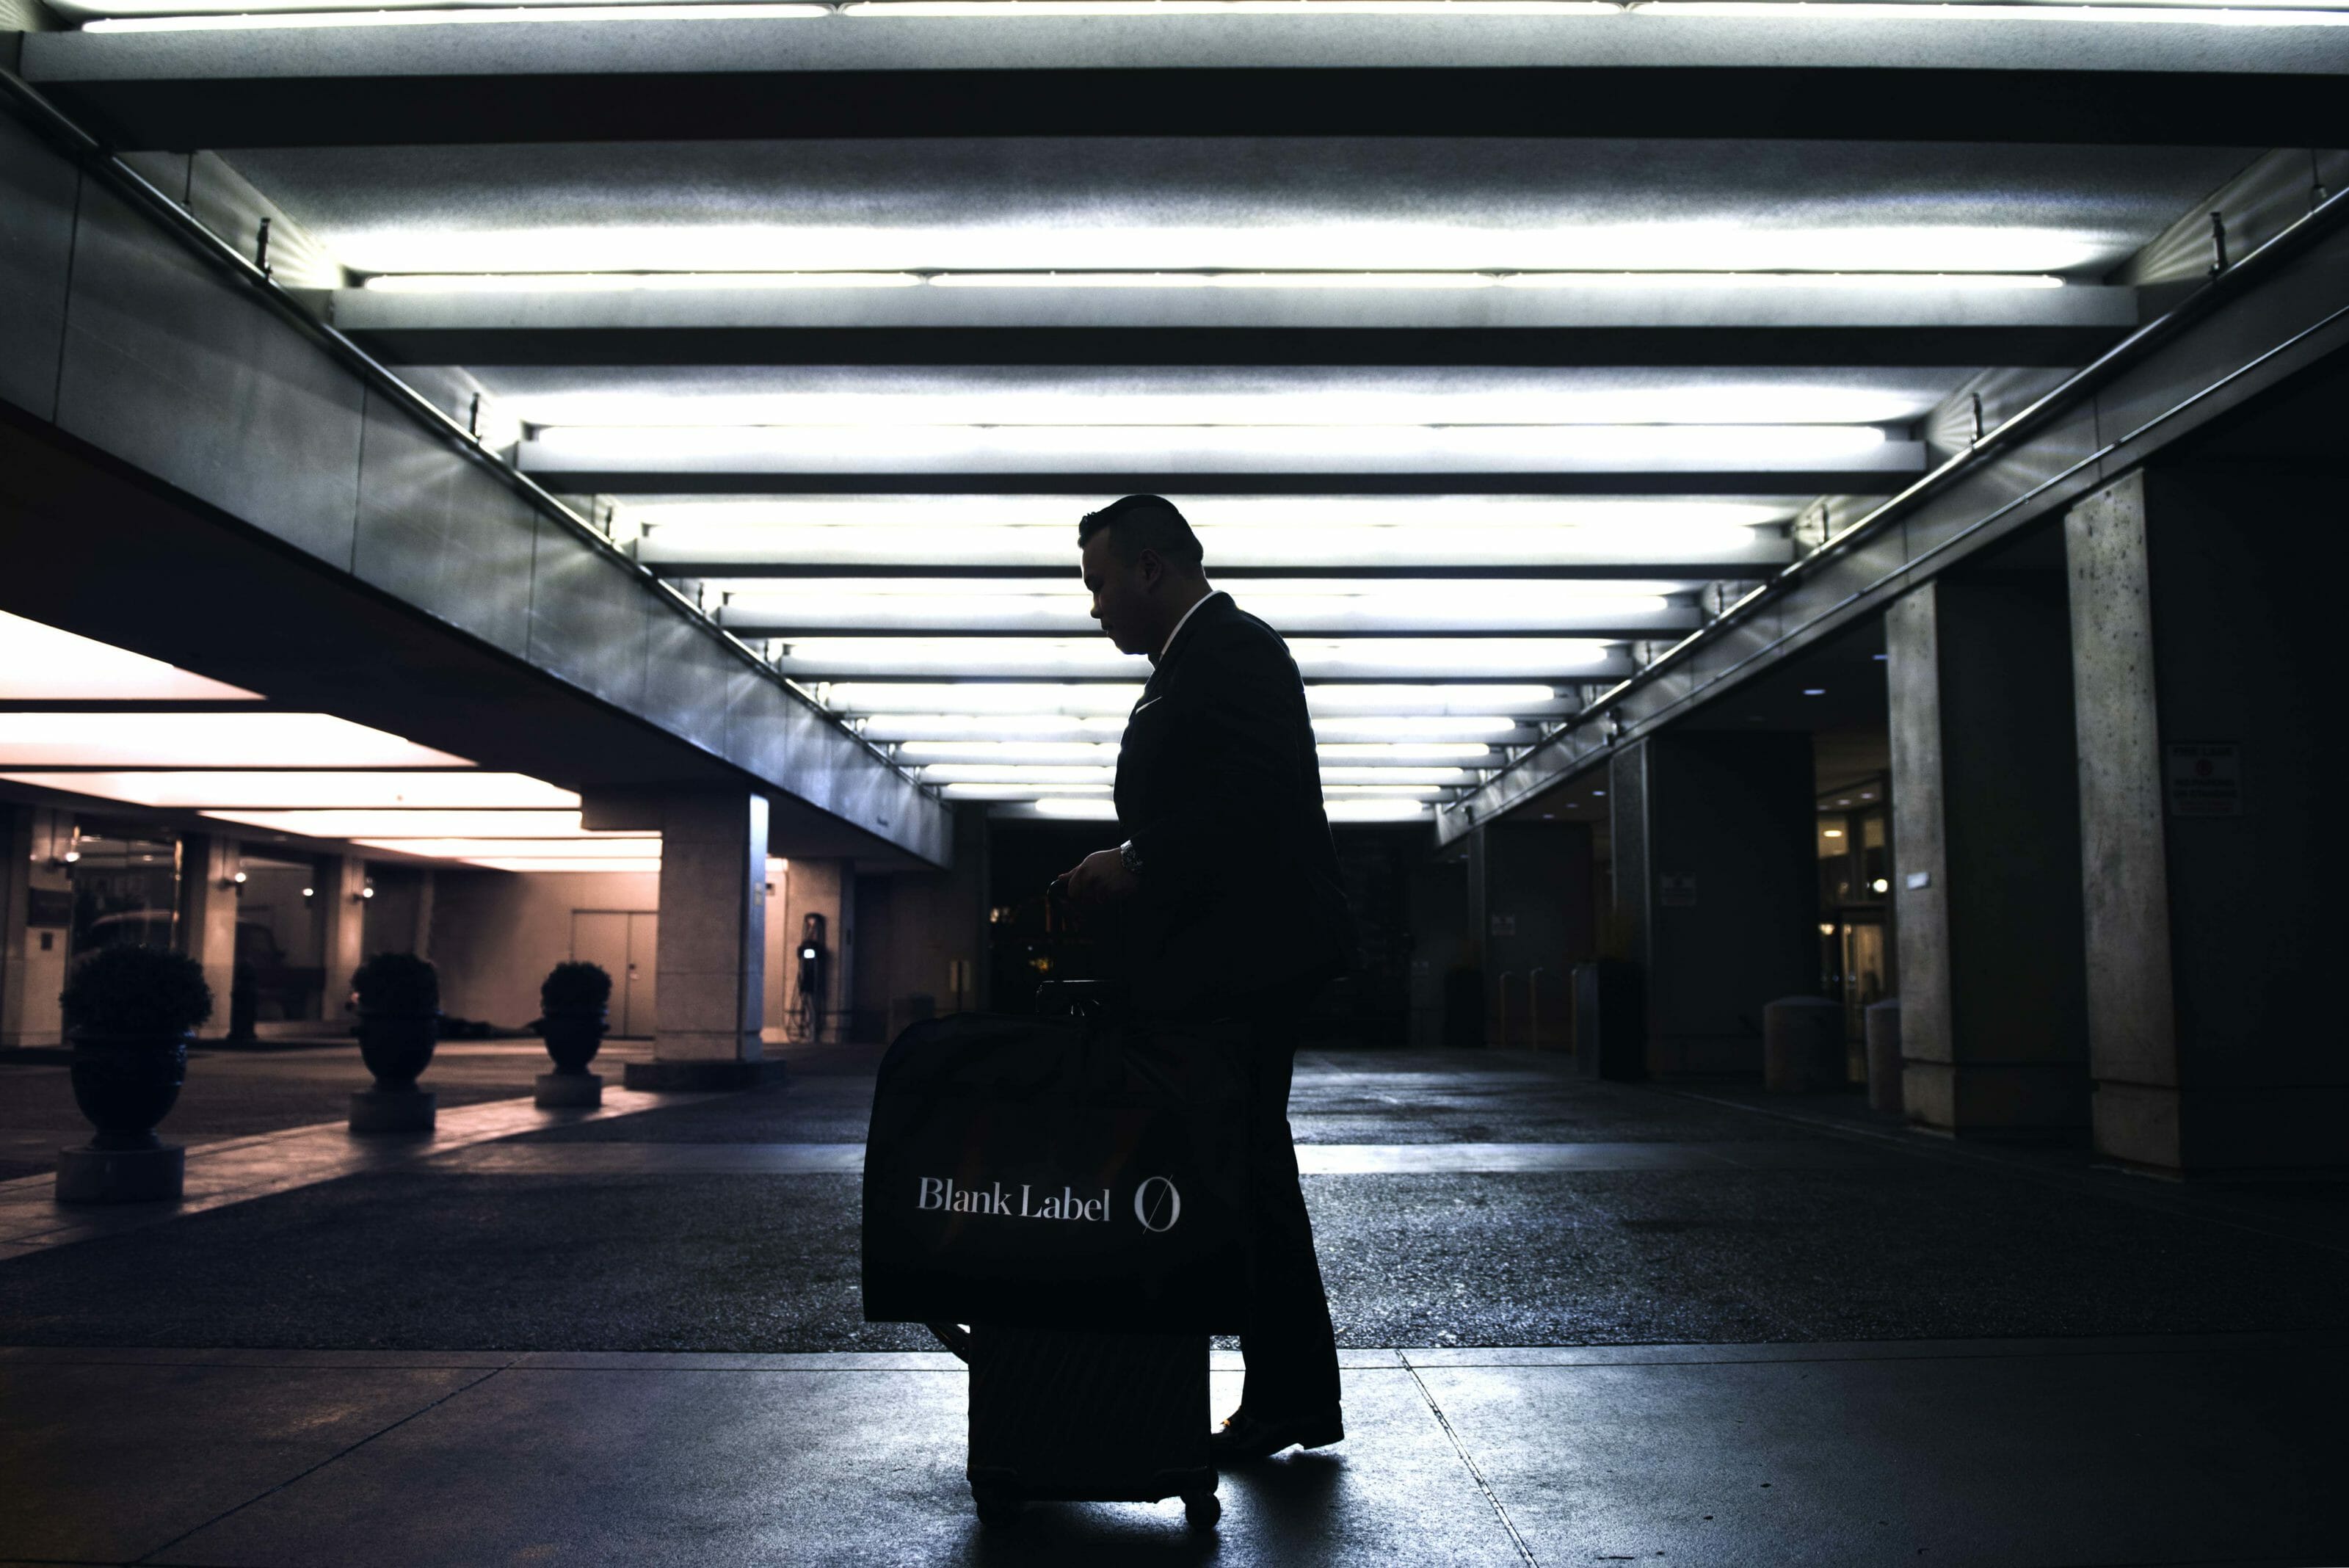 Man walking in a dimly lit garage, rolling a suitcase with a garment bag that reads “Blank Label.”